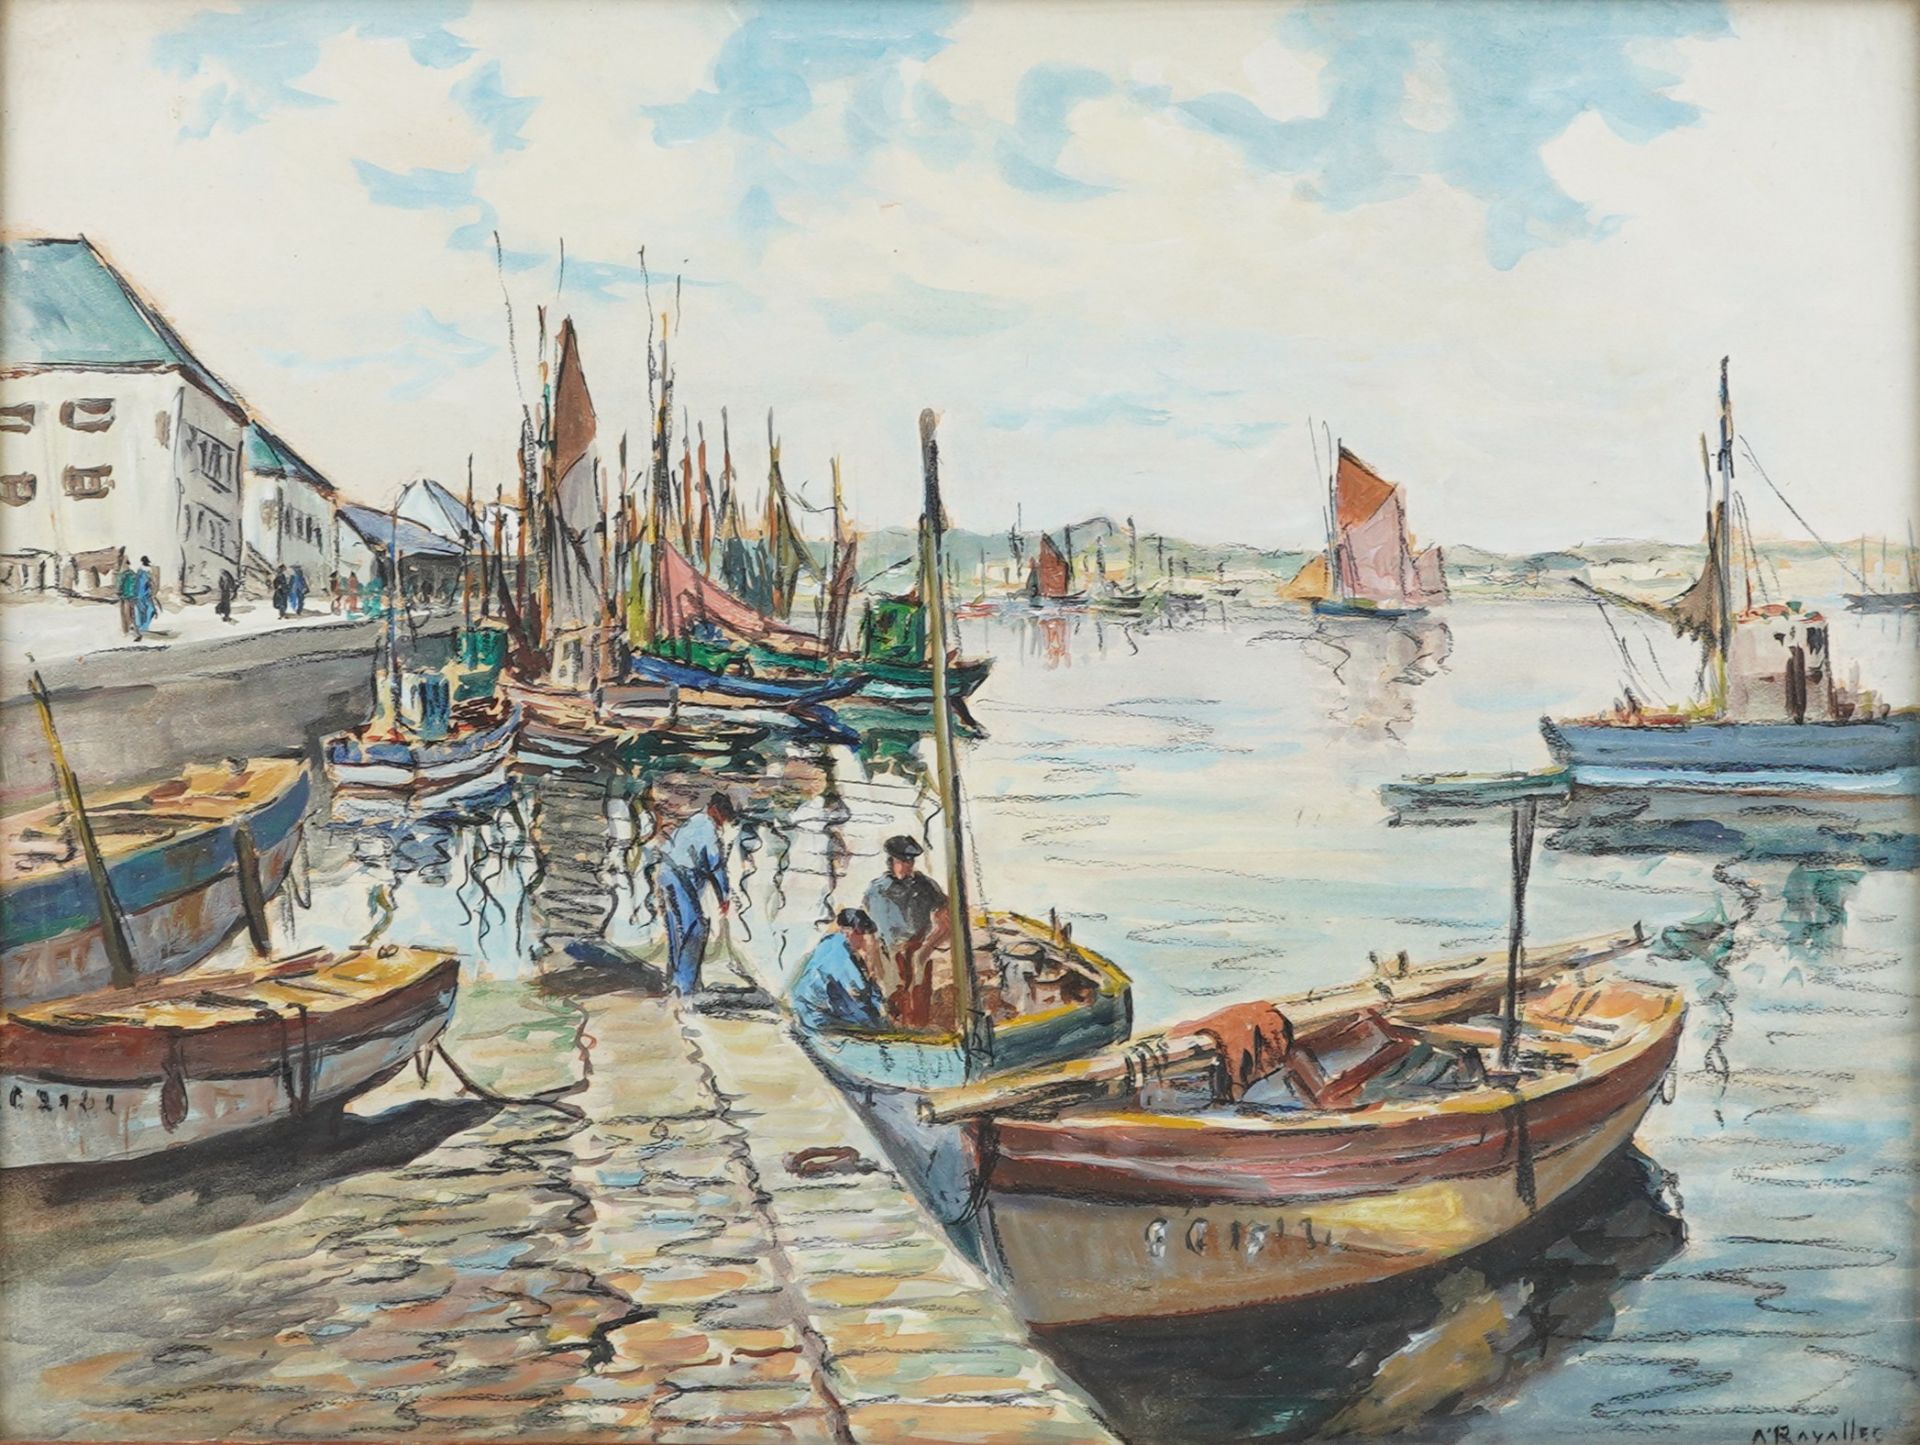 A Ravallec - Harbour scene with fishing boats, mixed media, framed and glazed, 48.5cm x 37cm